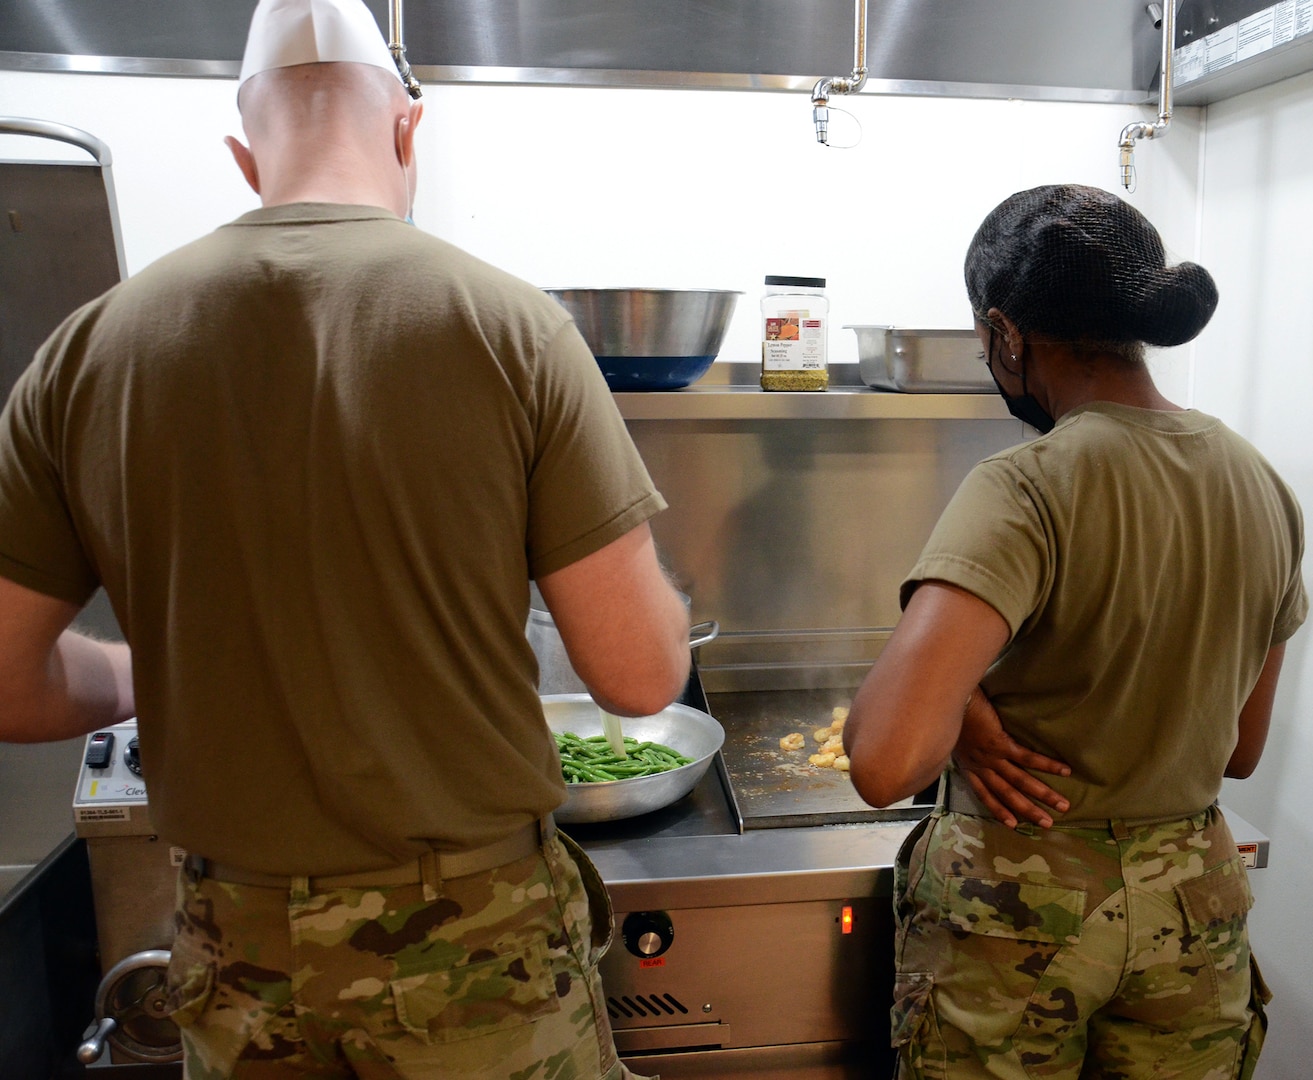 Nutrition and Diet Therapy program students Staff Sgt. Mathew Kensecki (left) and Airman 1st Class Marissa Stove (right) practice cooking during an Air Force food production course conducted in the kitchen training laboratory.